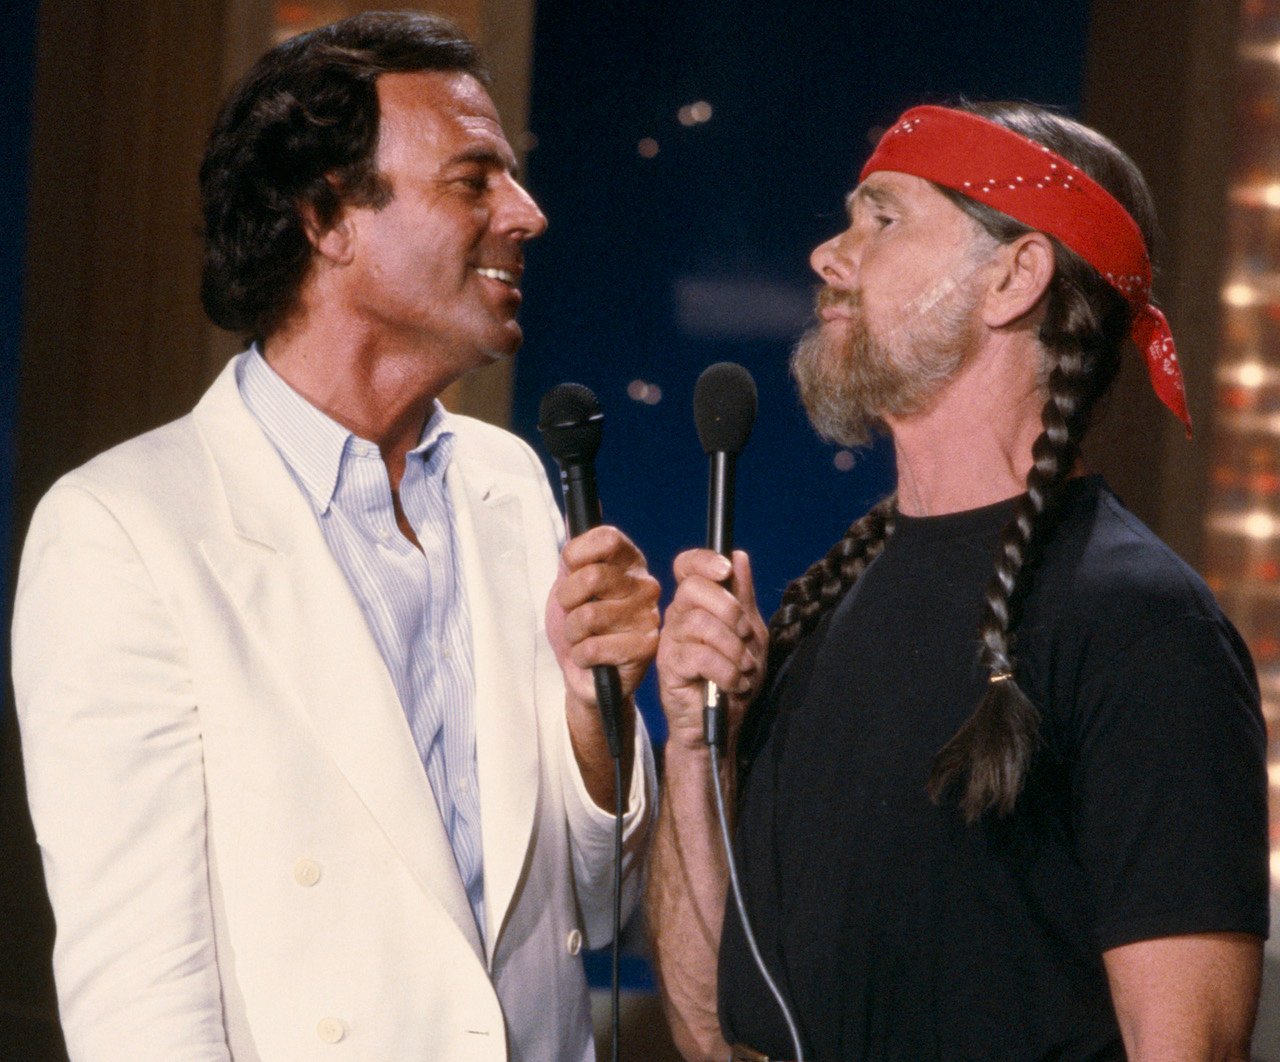 Julio Iglesias in a white suite, holding a microphone and looking at Johnny Carson, who is dressed as Willie Nelson